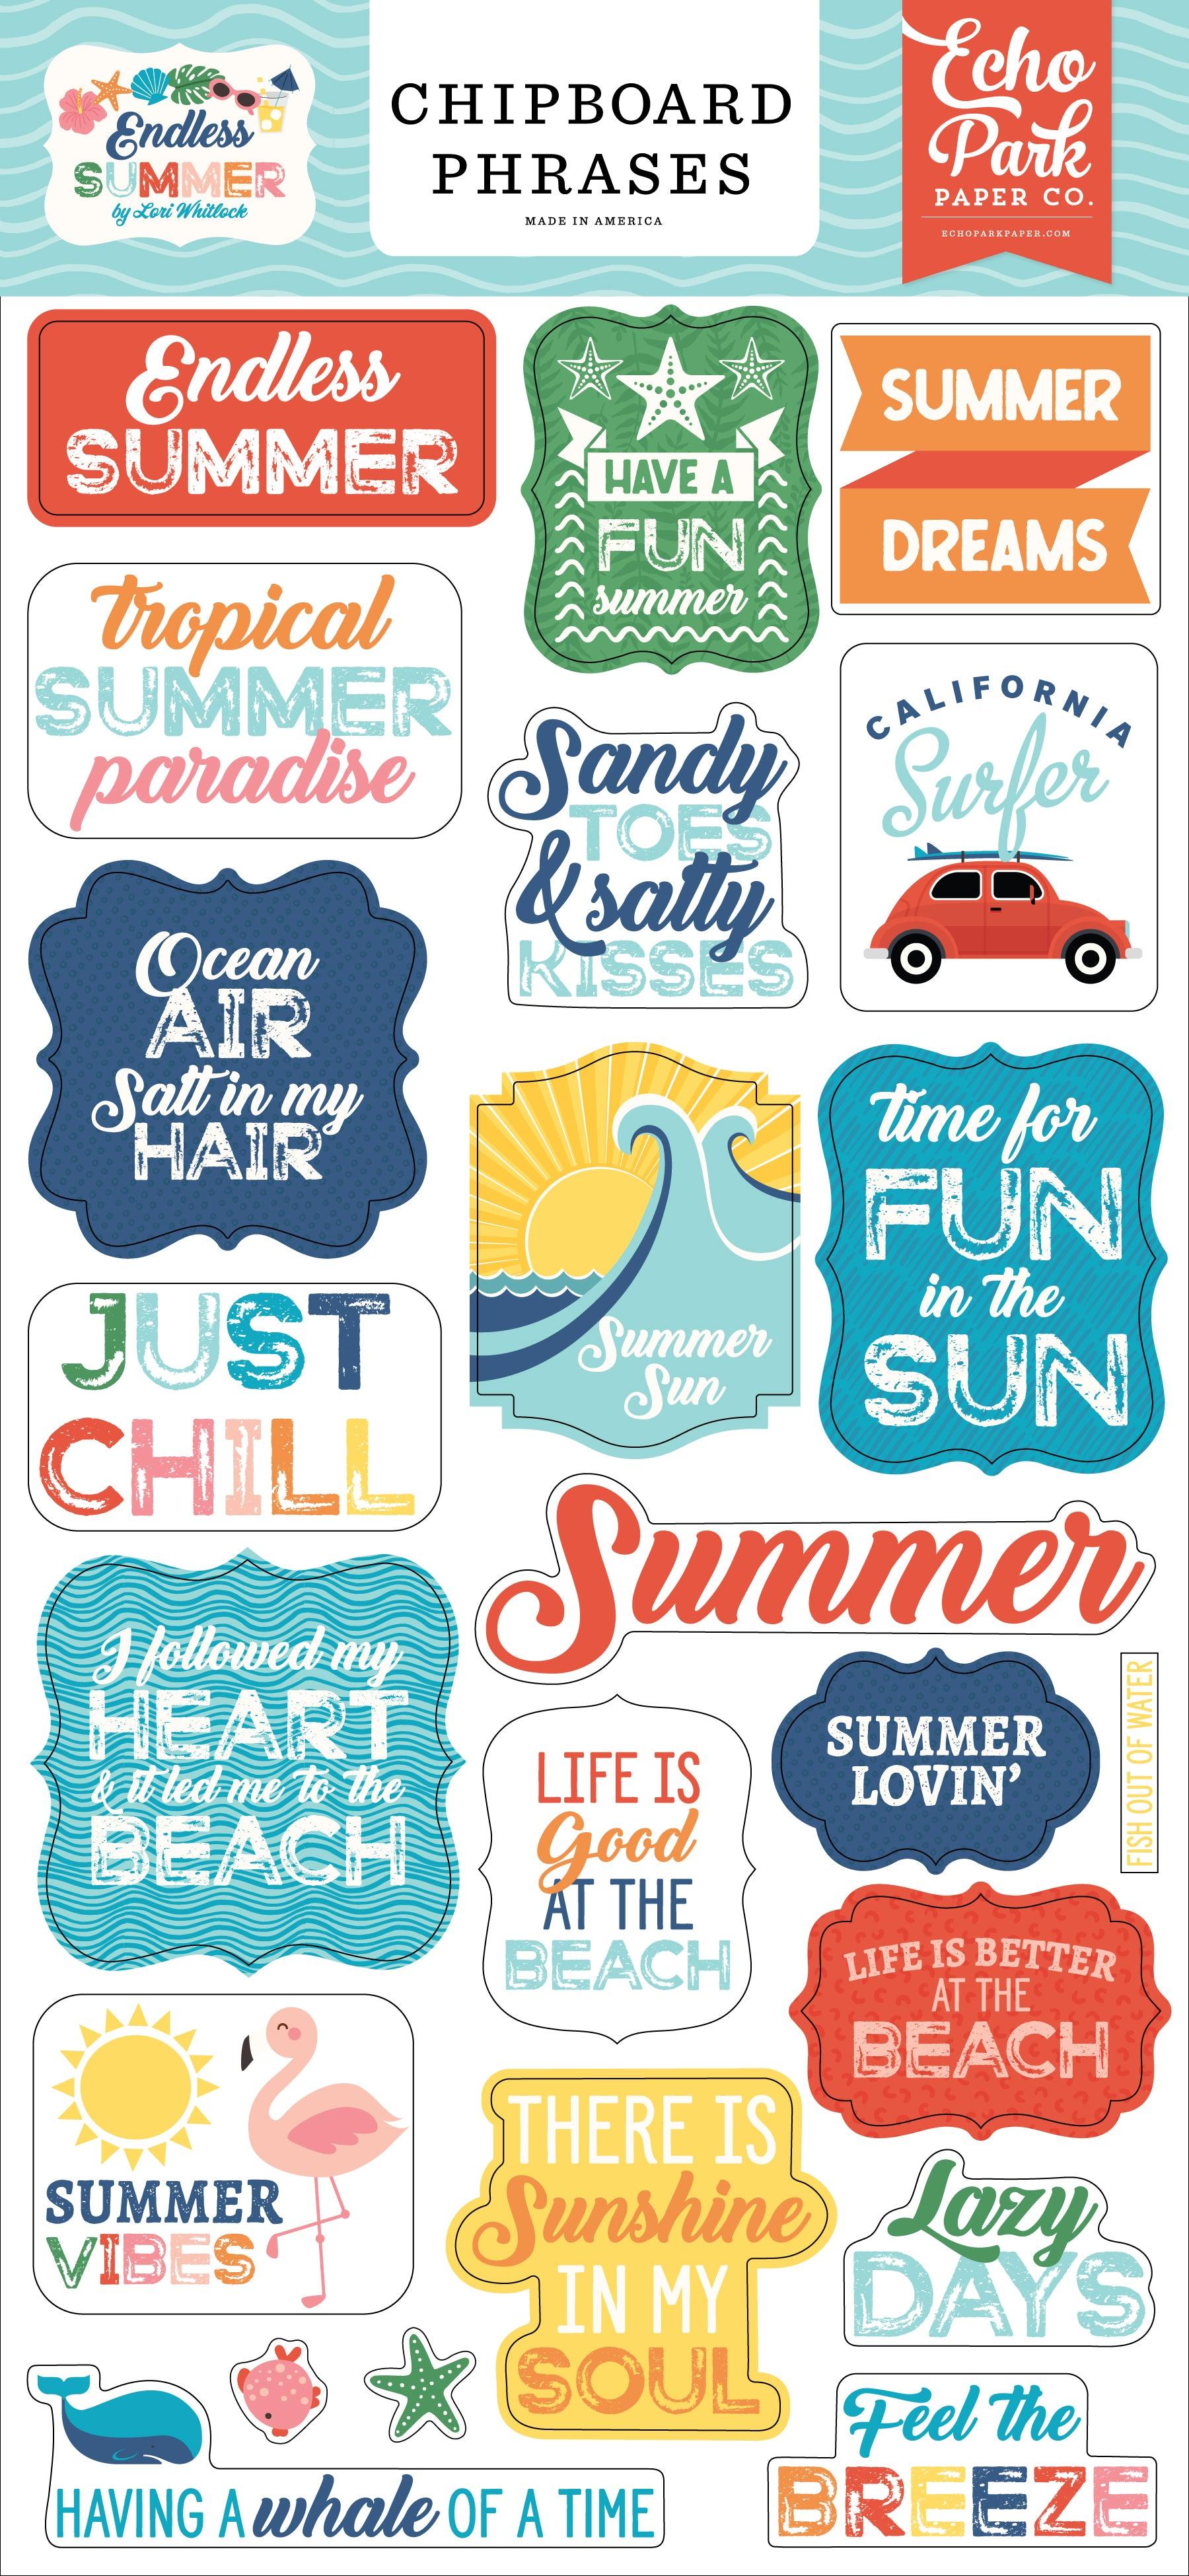 Endless Summer Collection 6 x 12 Scrapbook Chipboard Phrases by Echo Park Paper - Scrapbook Supply Companies